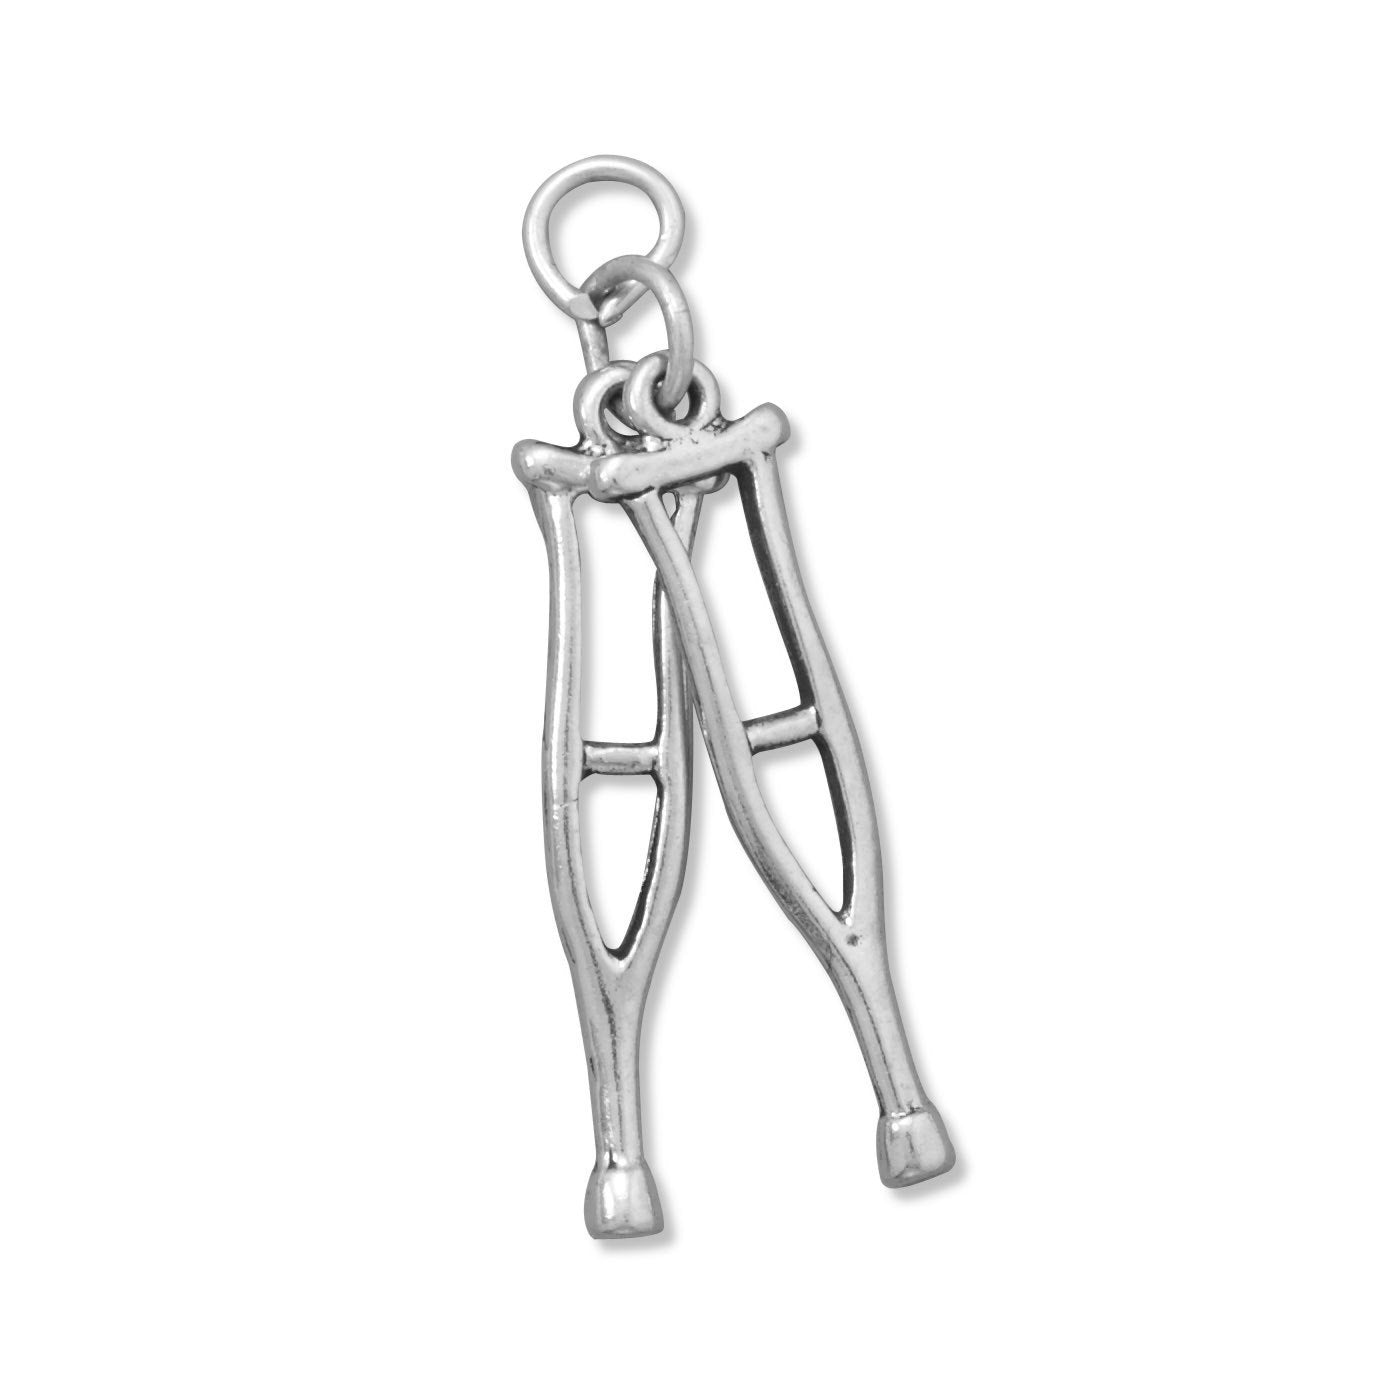 Sterling Silver Pair of Crutches Bracelet Charm